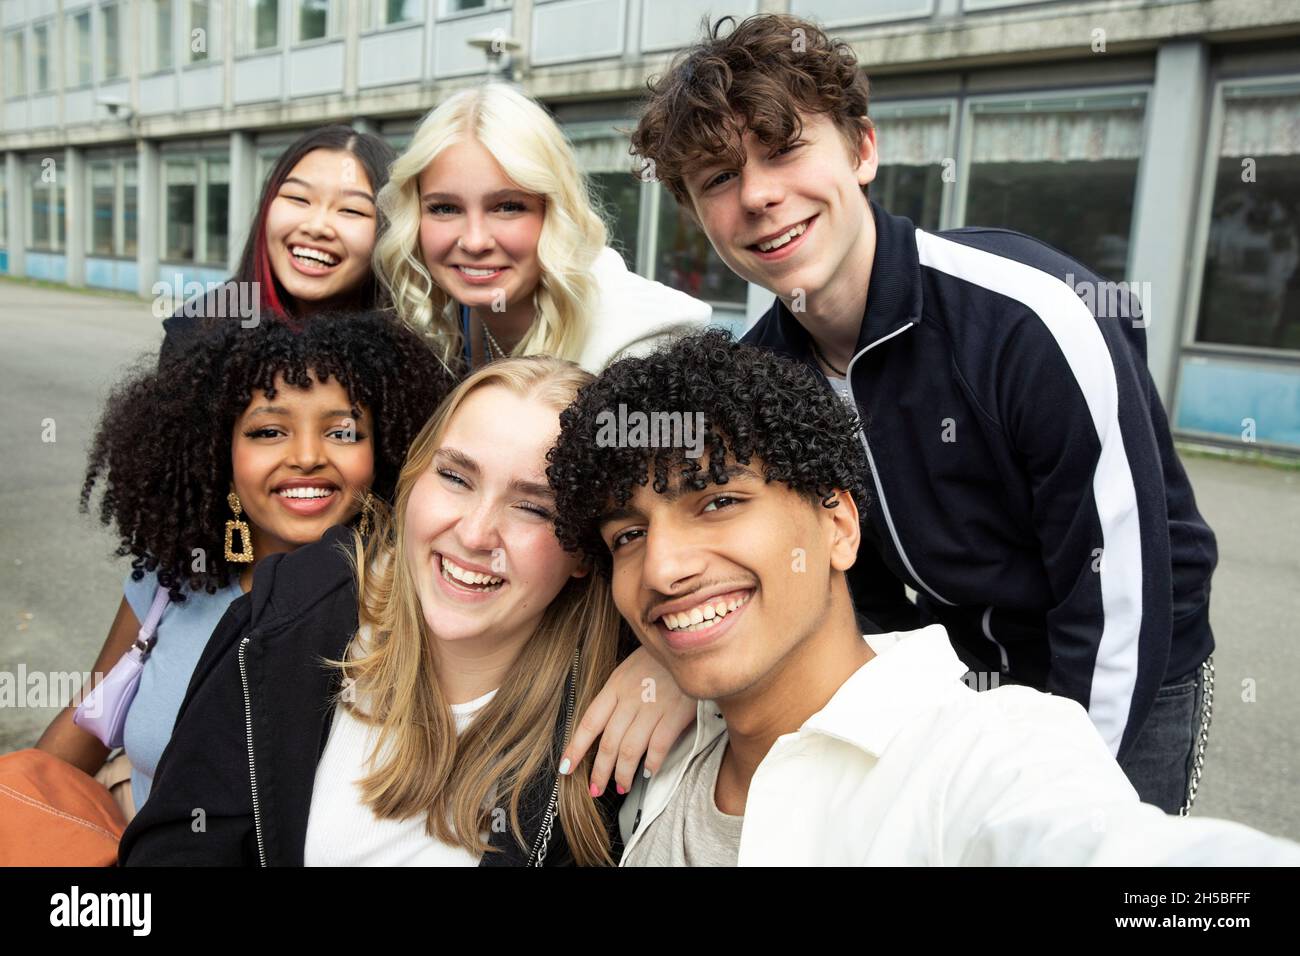 Portrait of smiling male and female friends against building Stock Photo